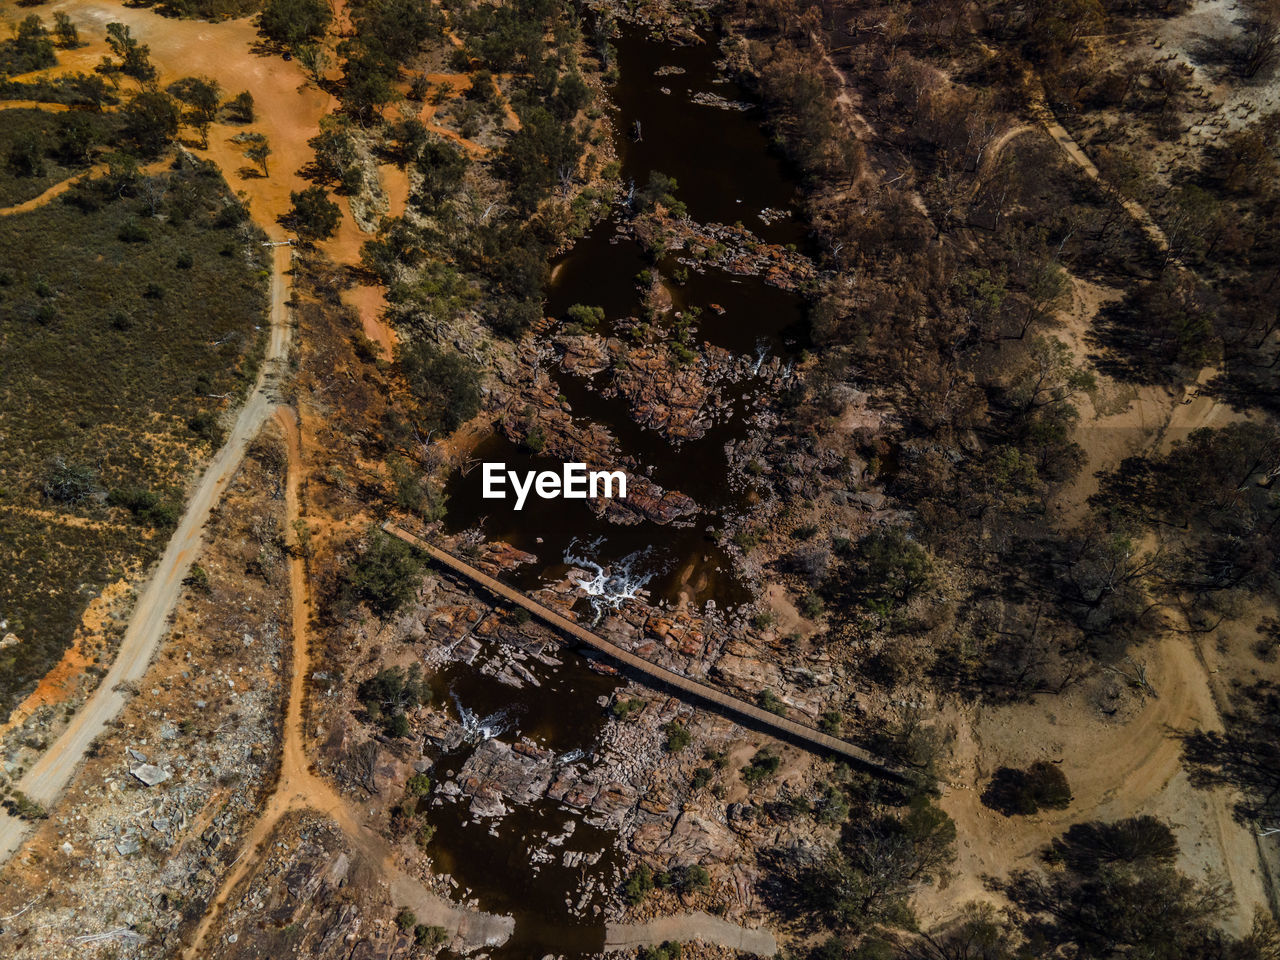 HIGH ANGLE VIEW OF RAILROAD TRACKS AMIDST TREES